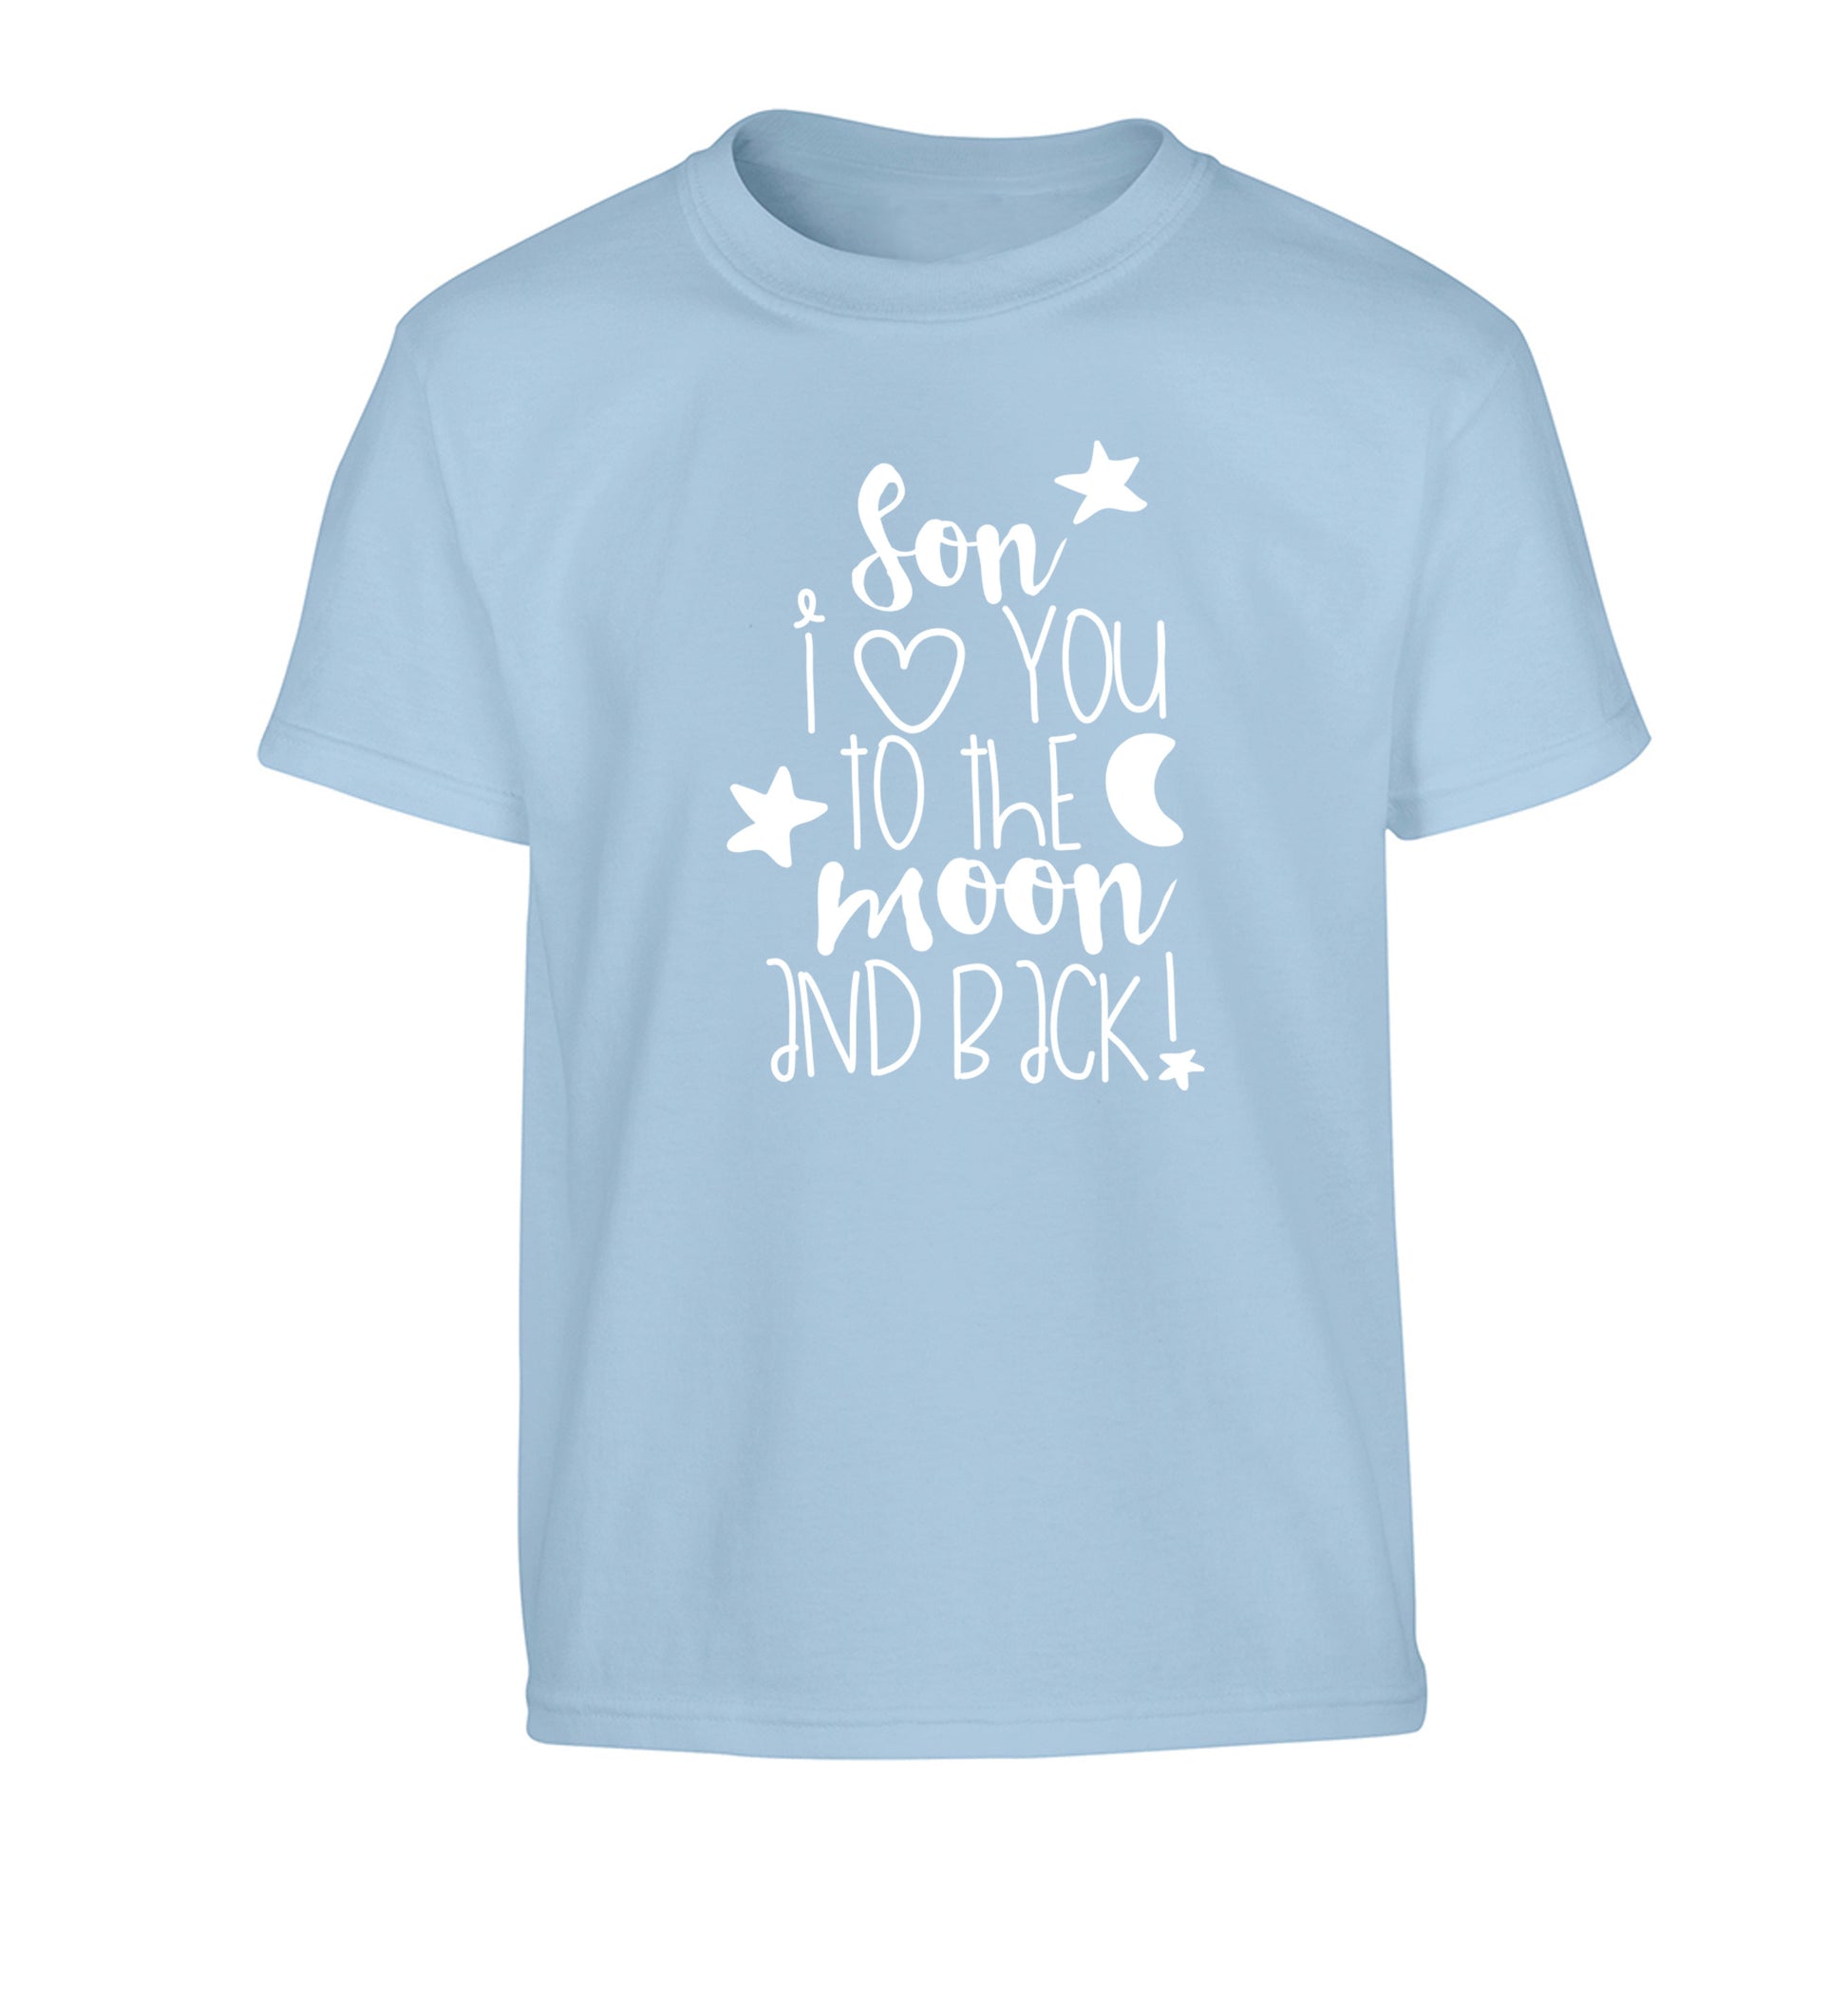 Son I love you to the moon and back Children's light blue Tshirt 12-14 Years